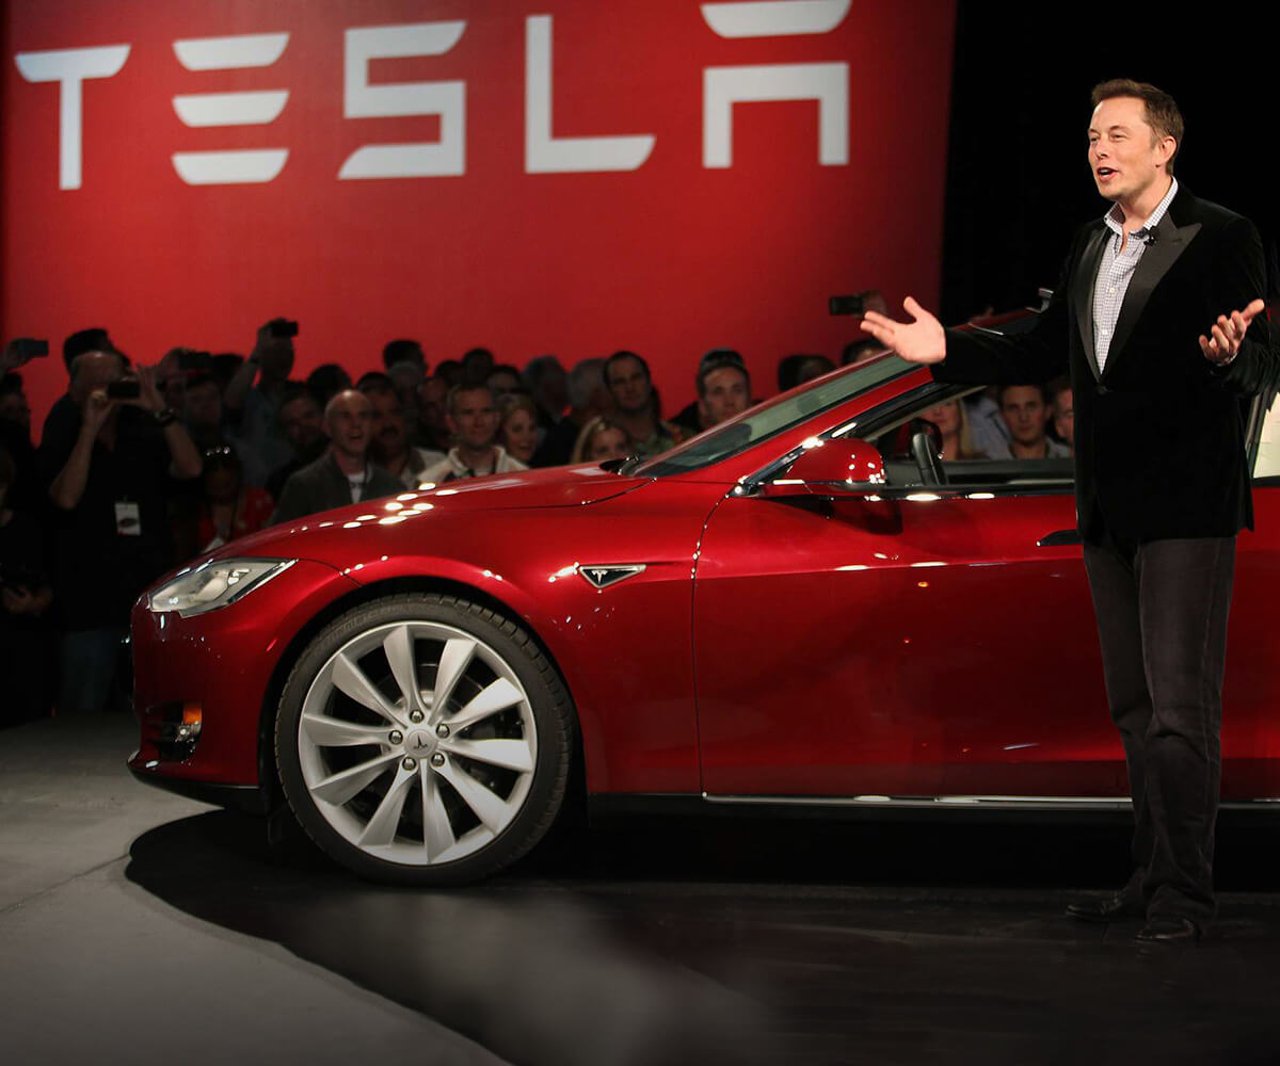 Elon Musk delivering a speech stood in front on a red Tesla with the Tesla logo in the background.